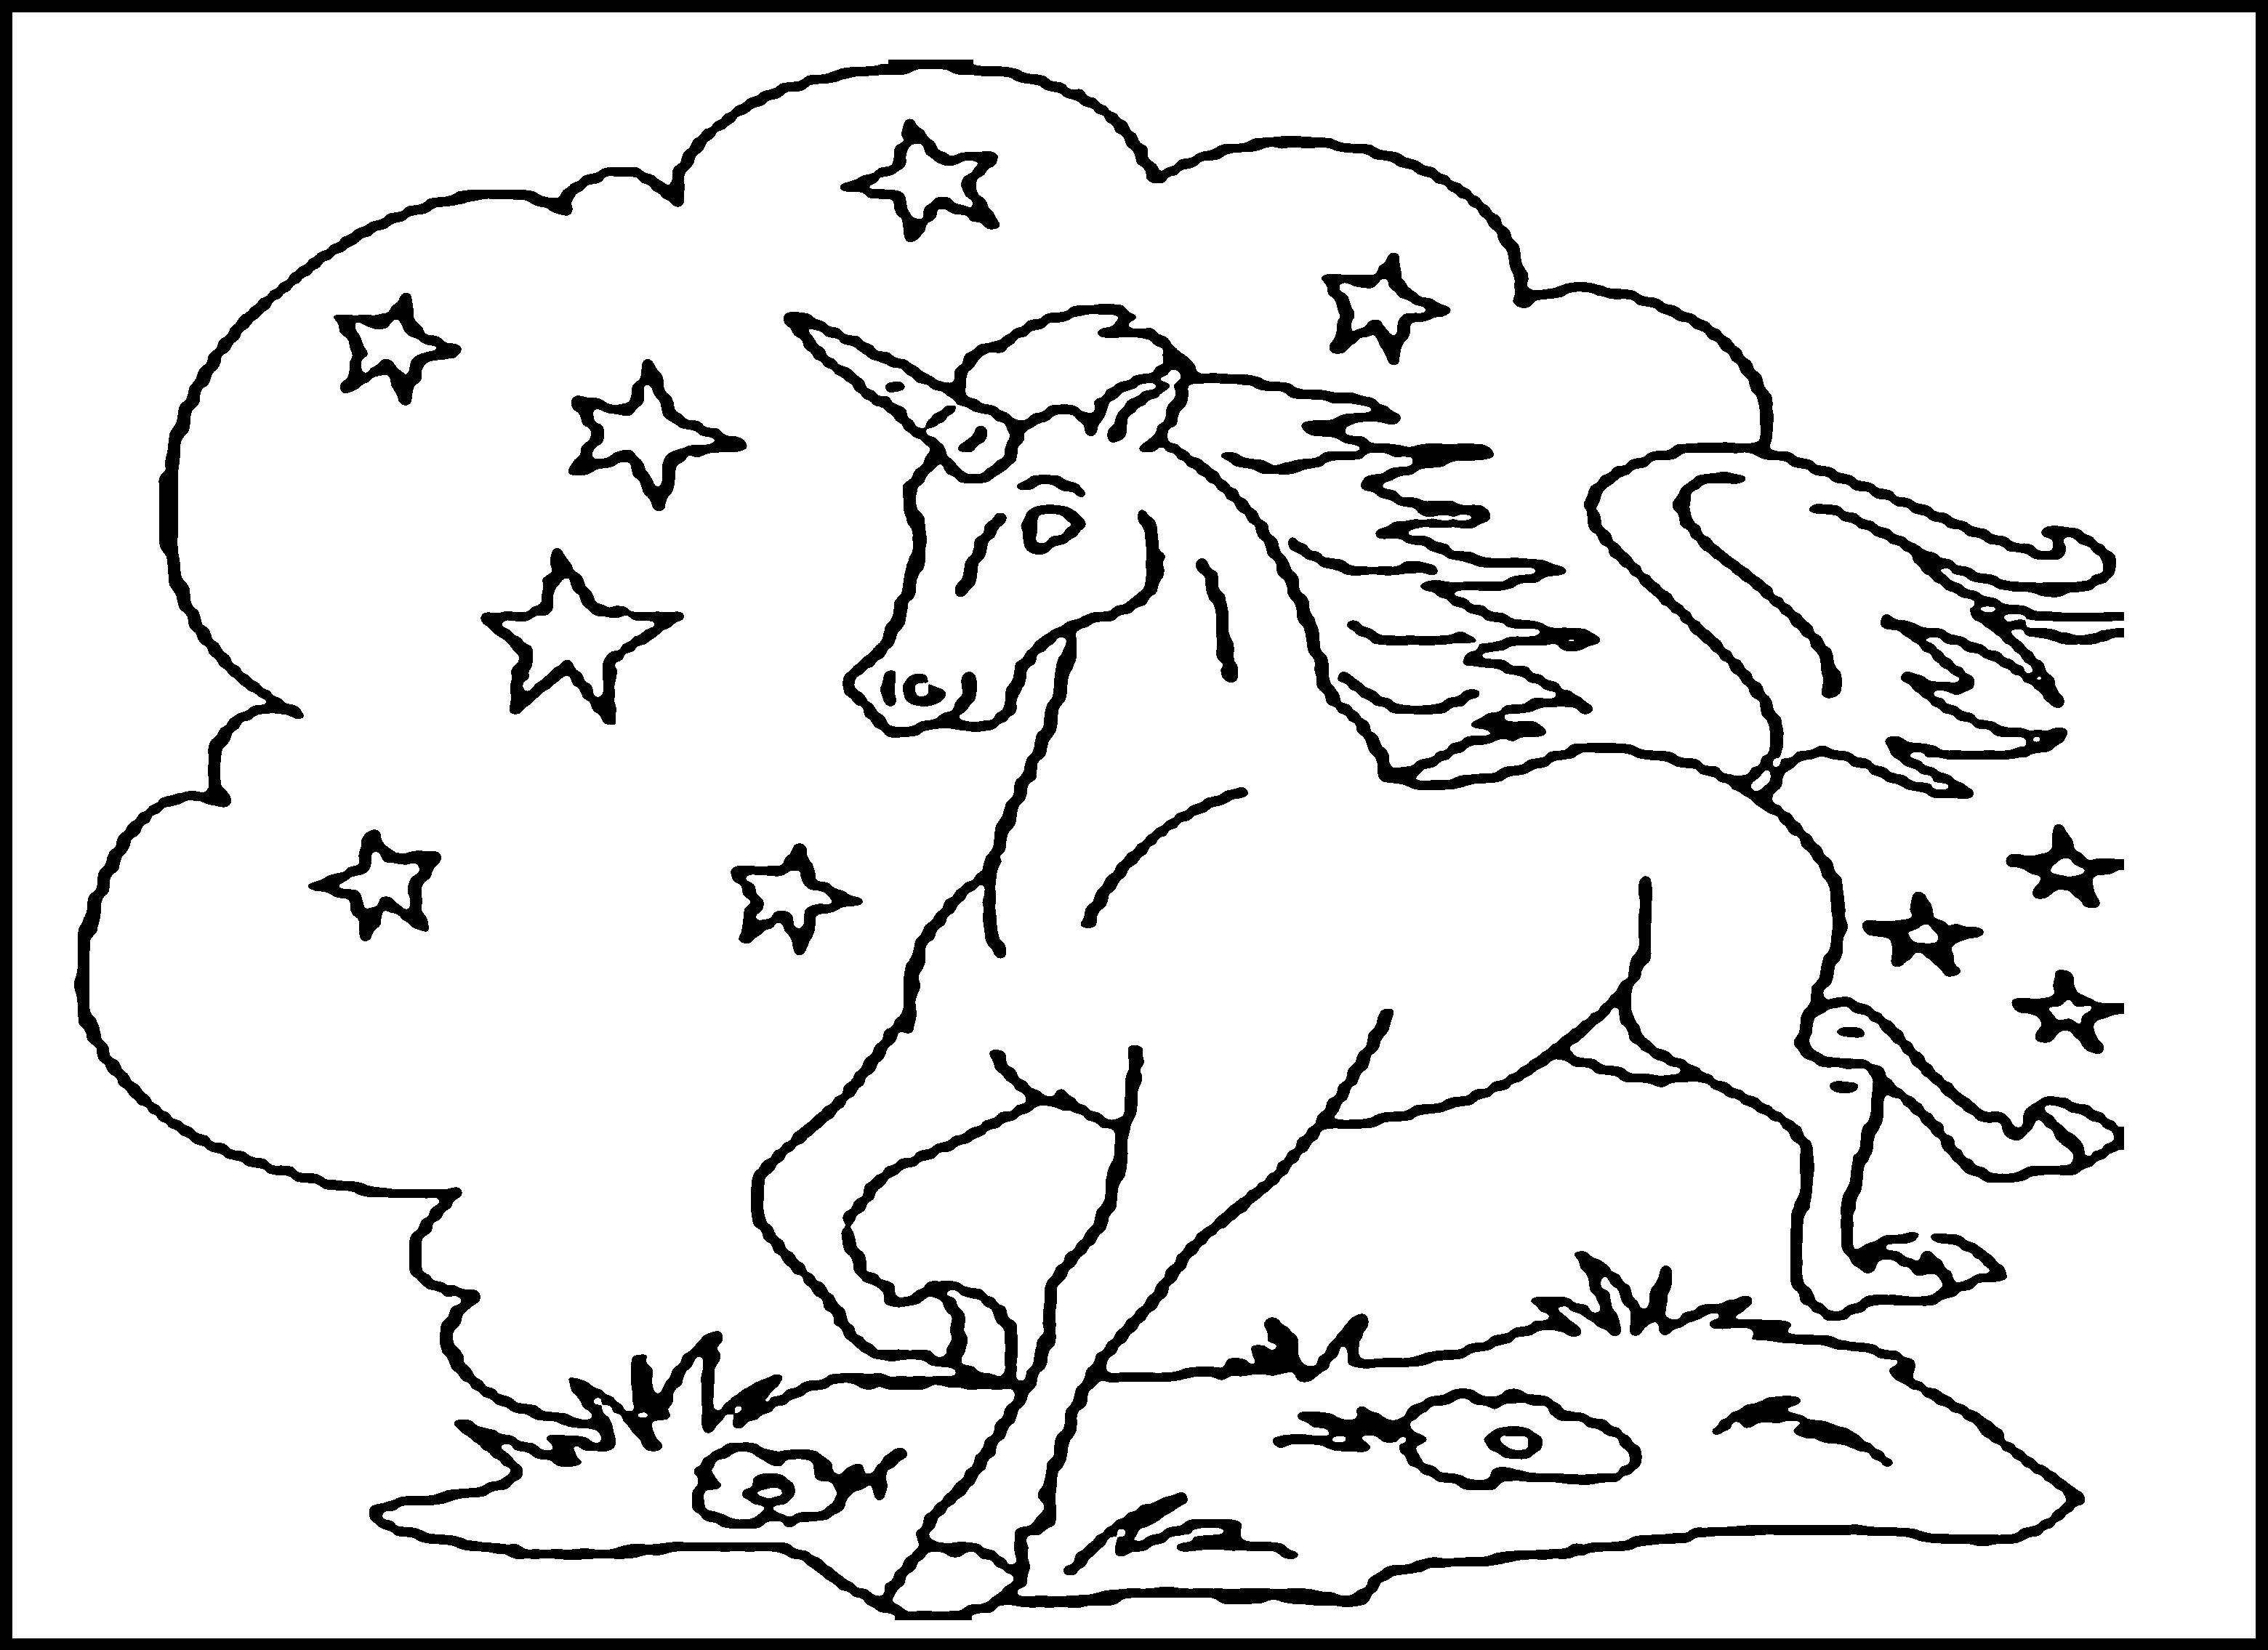 Coloring Unicorn in the night sky. Category Animals. Tags:  Animals, unicorn.